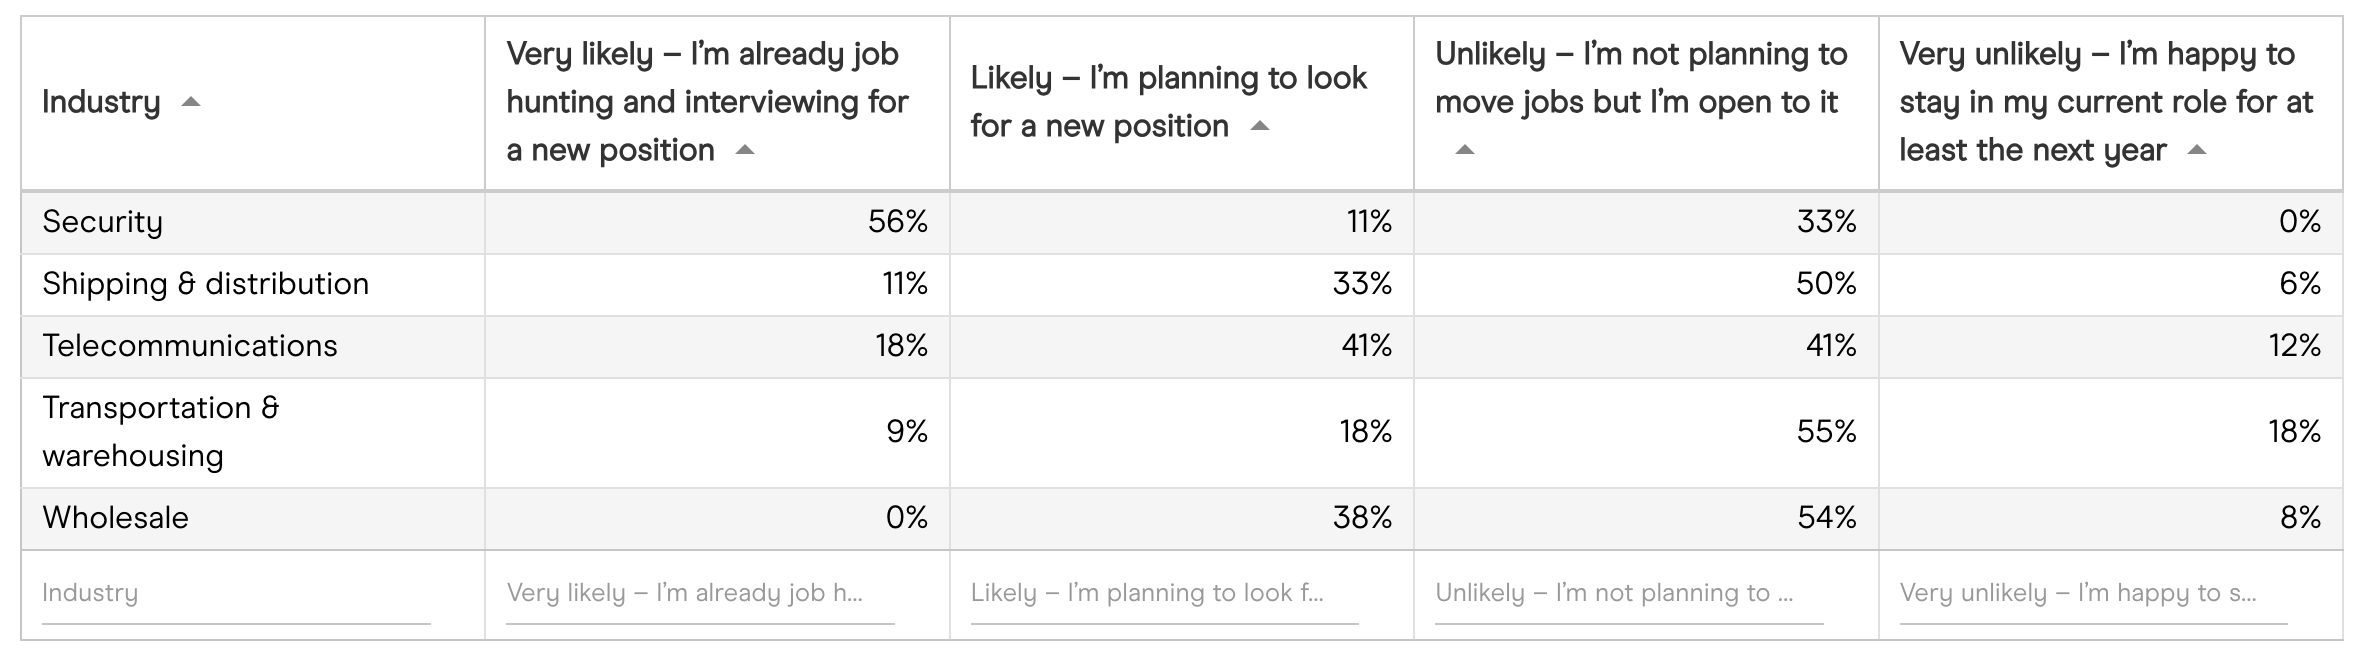 How likely is it that you will change employer within the next year - by industry